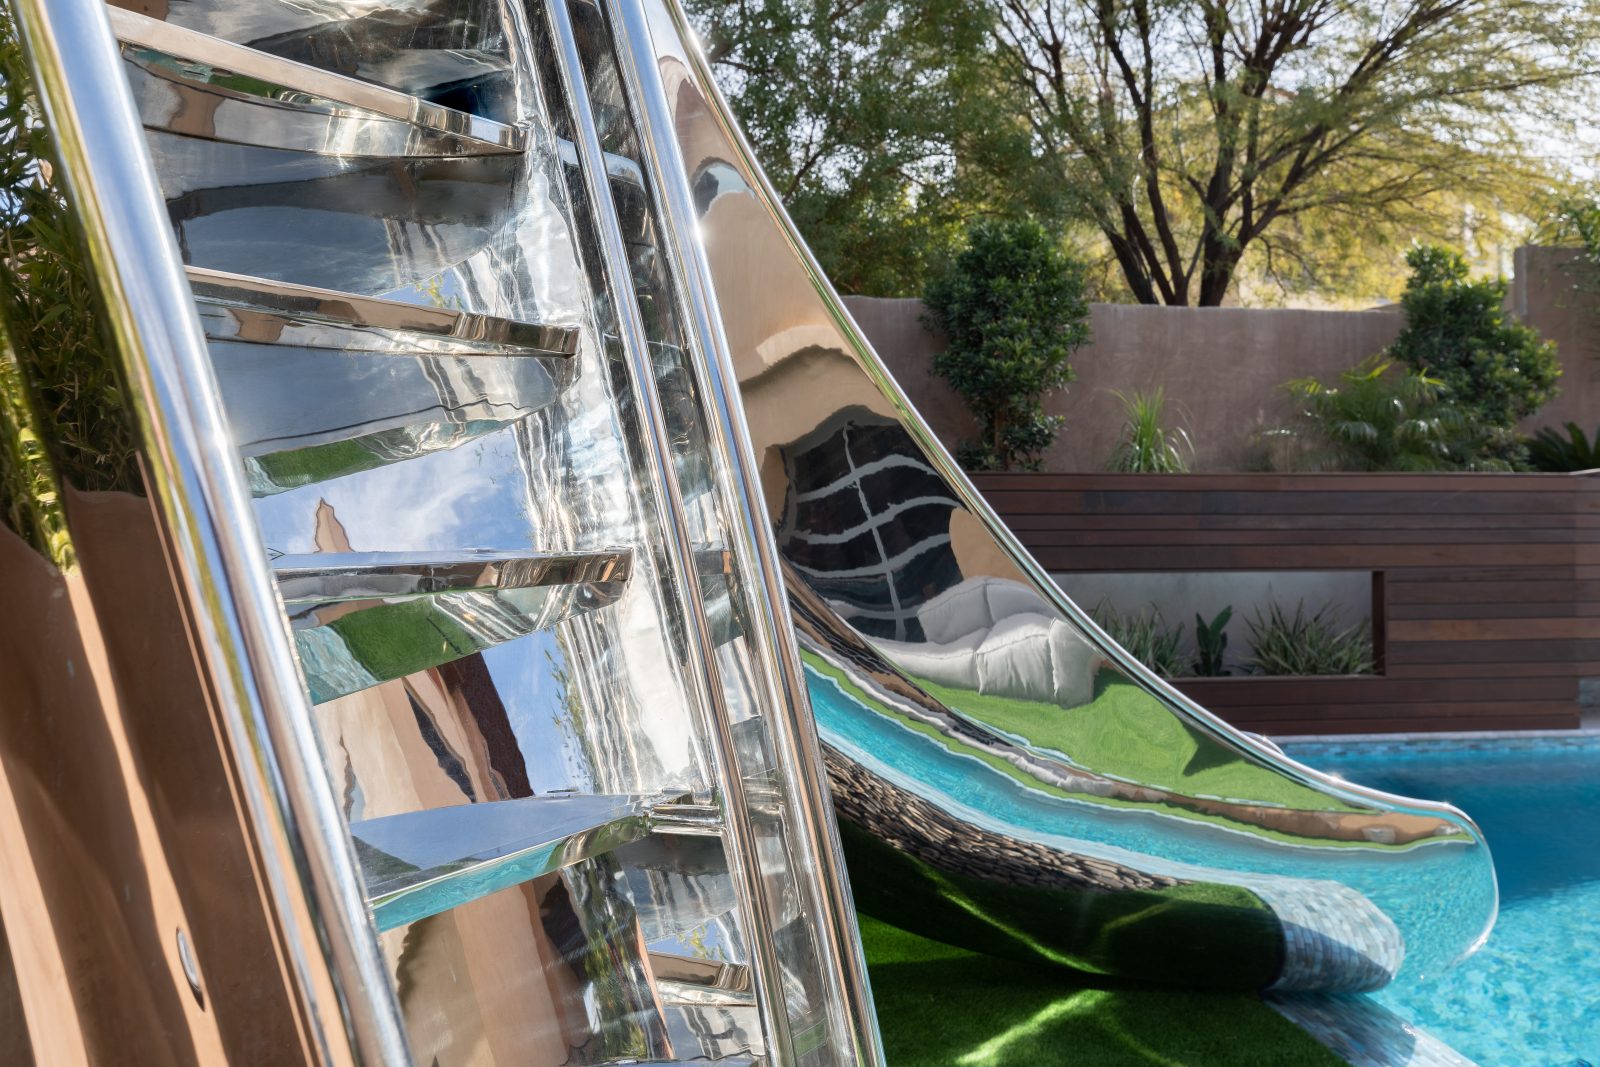 Close up of steps and refelctions of a stainless steel pool slide